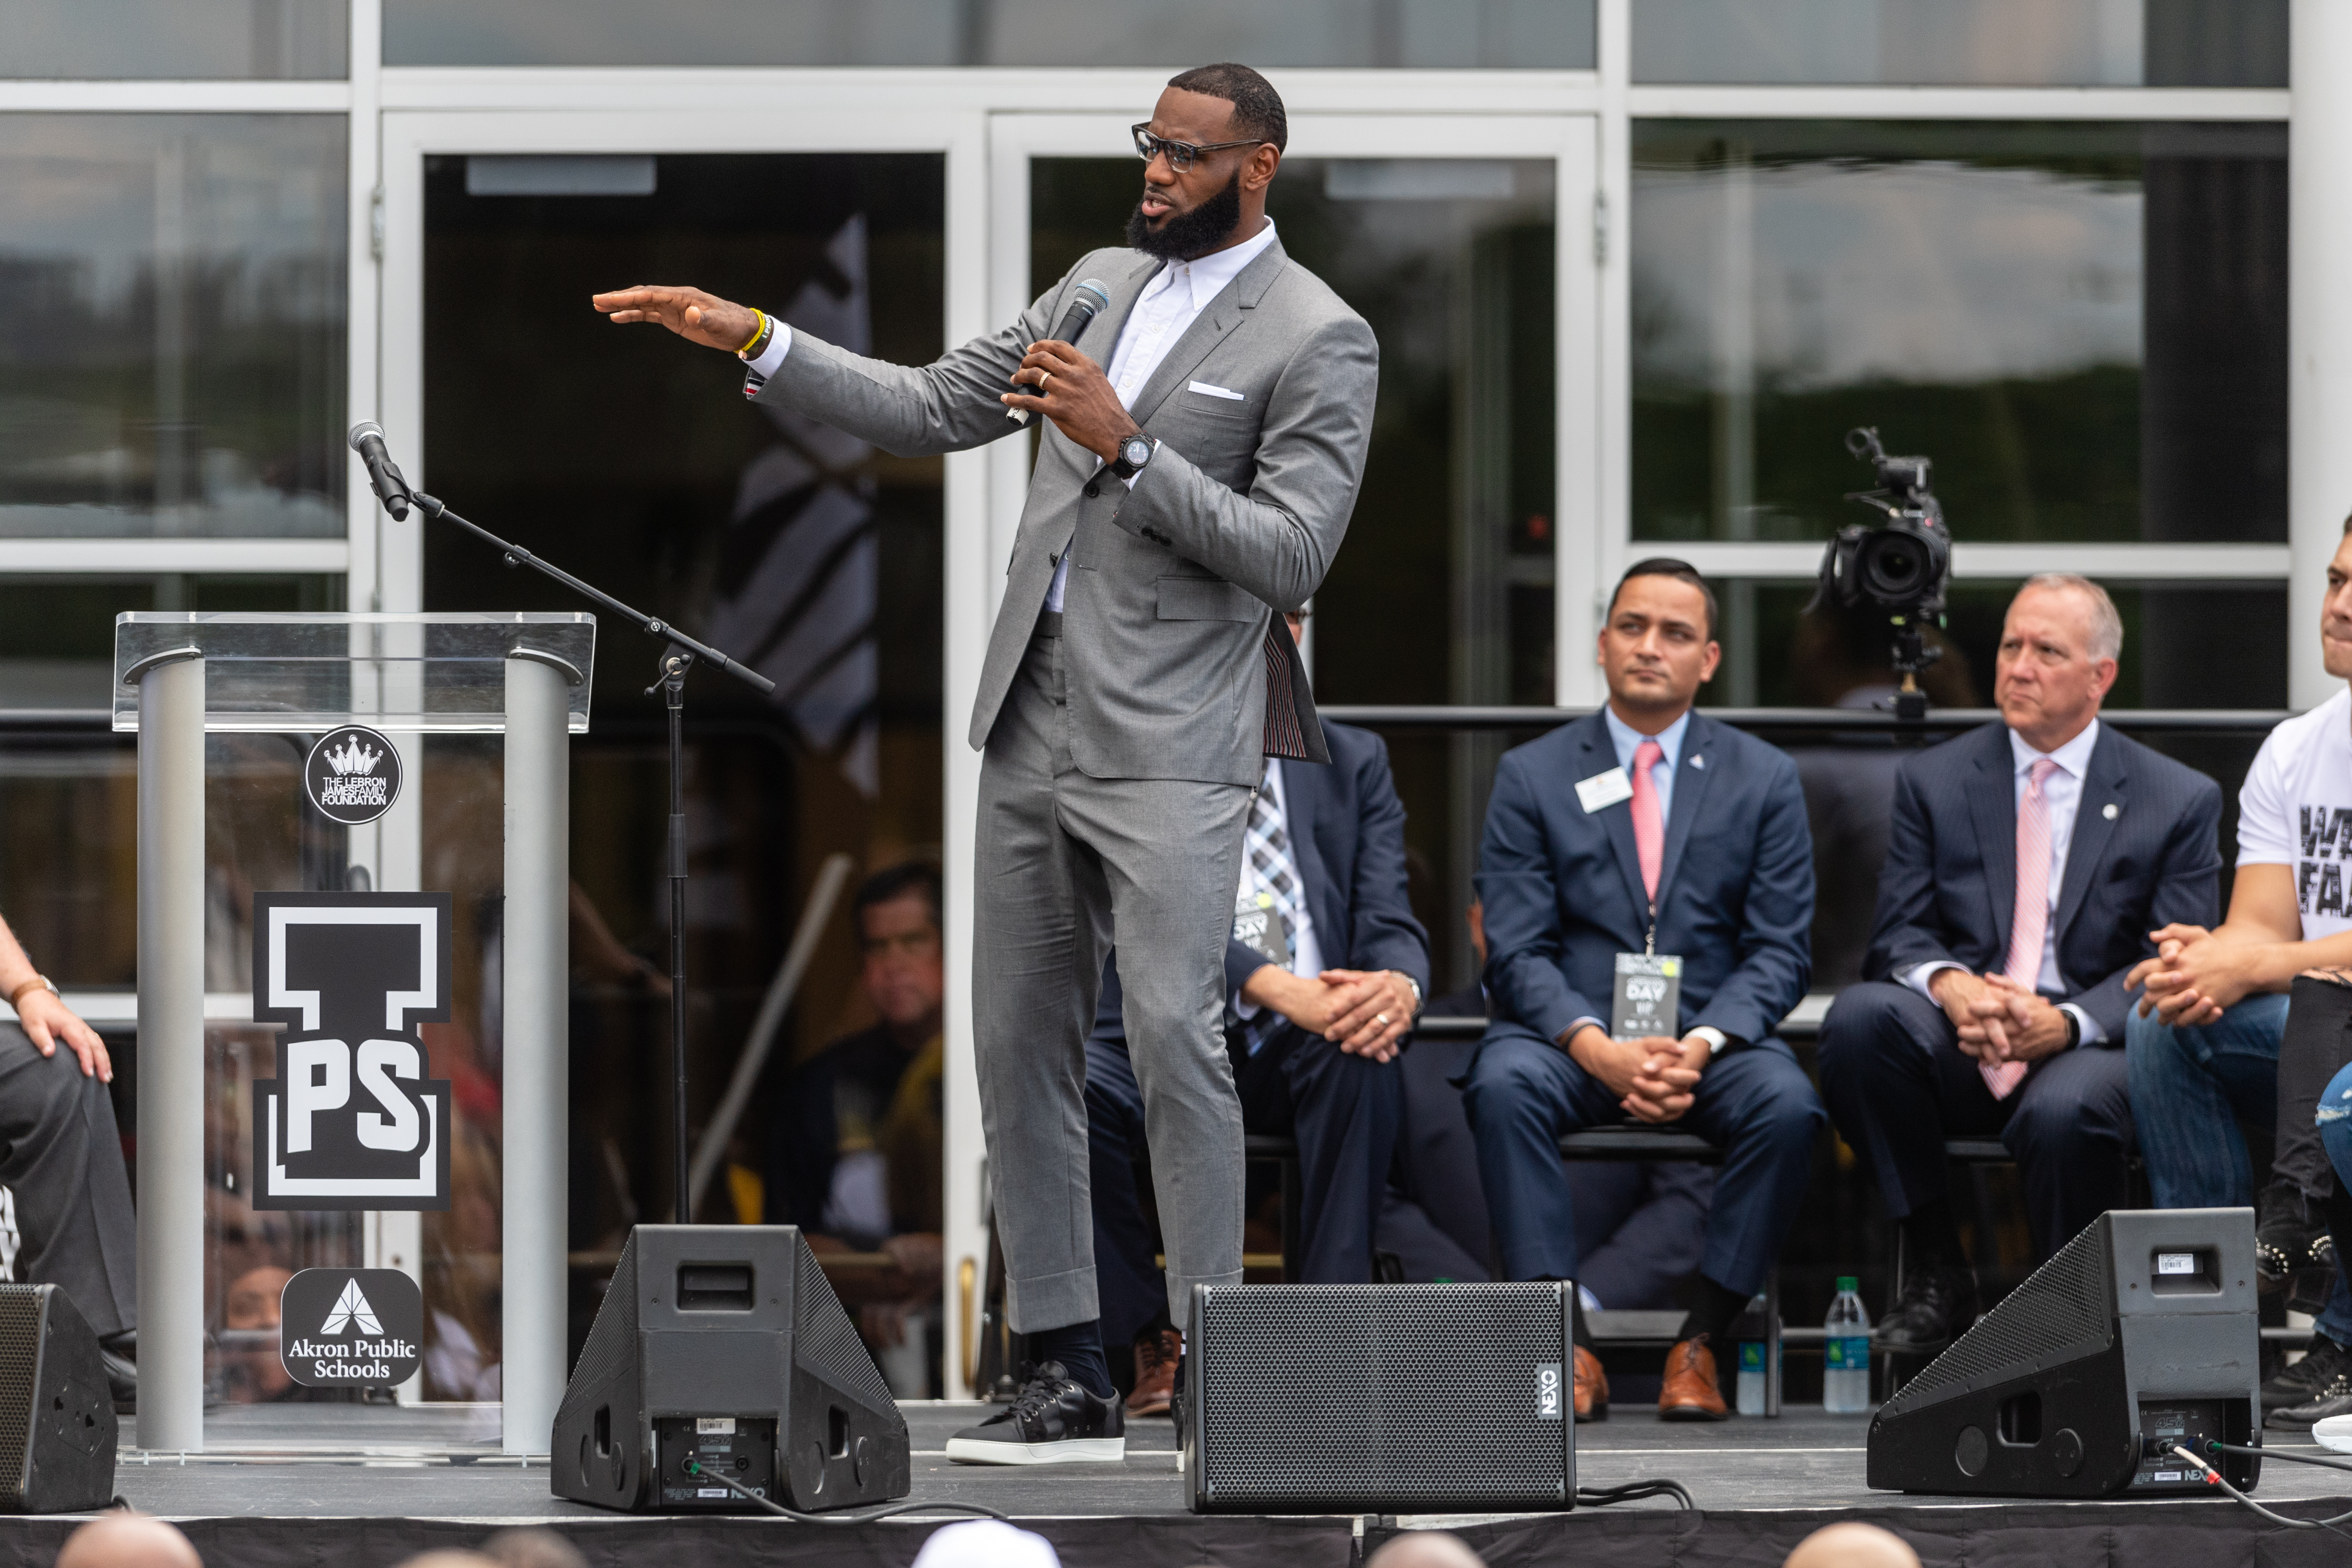 LeBron James Family Foundation on X: Looks like we'll have